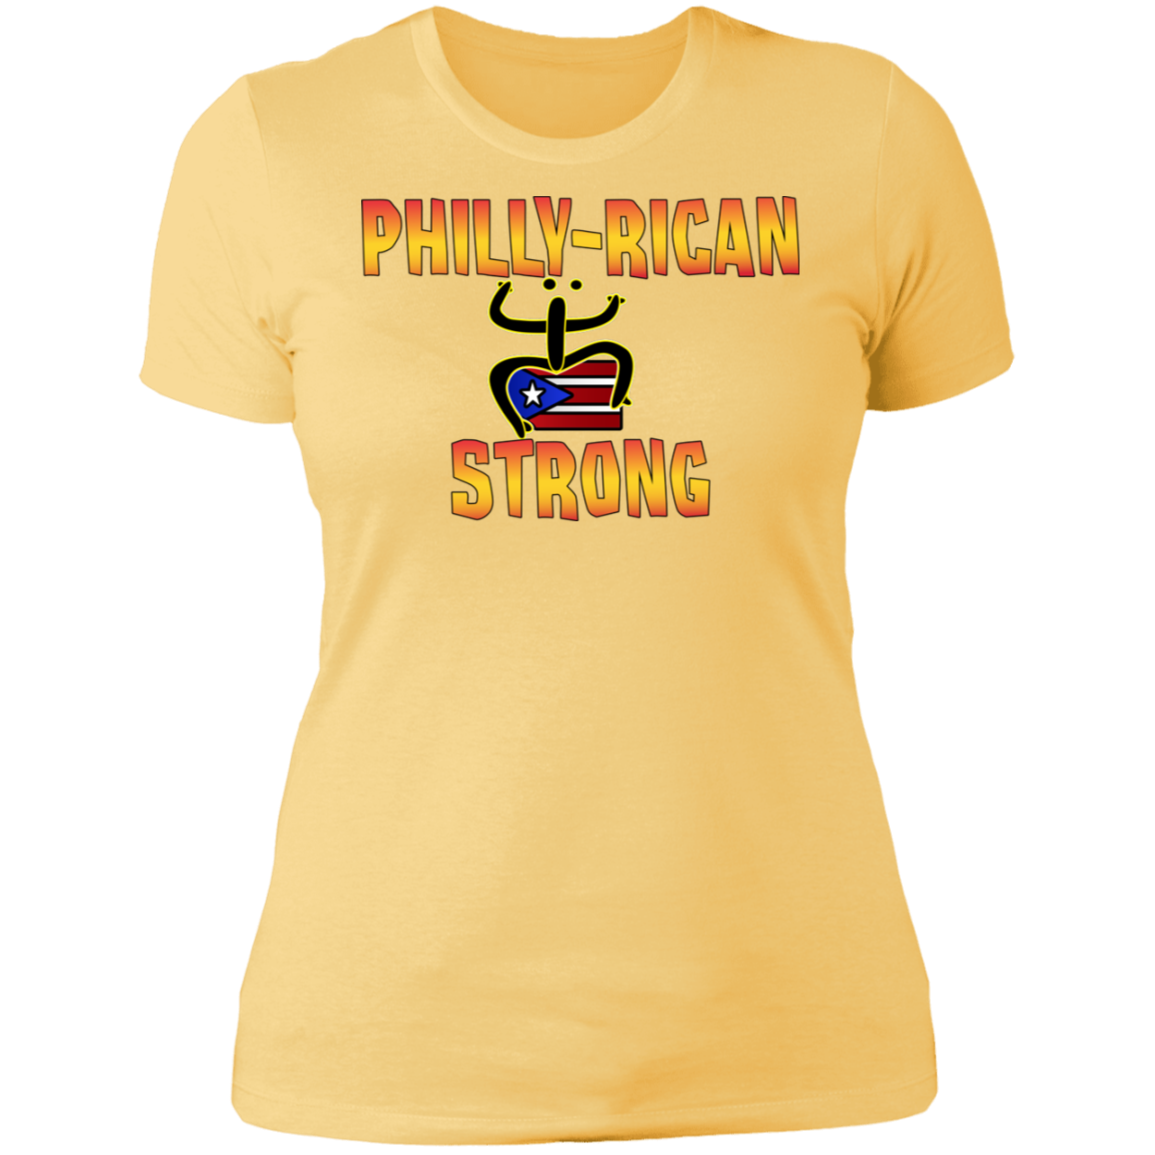 Philly-Rican Strong  Ladies' Boyfriend T-Shirt - Puerto Rican Pride